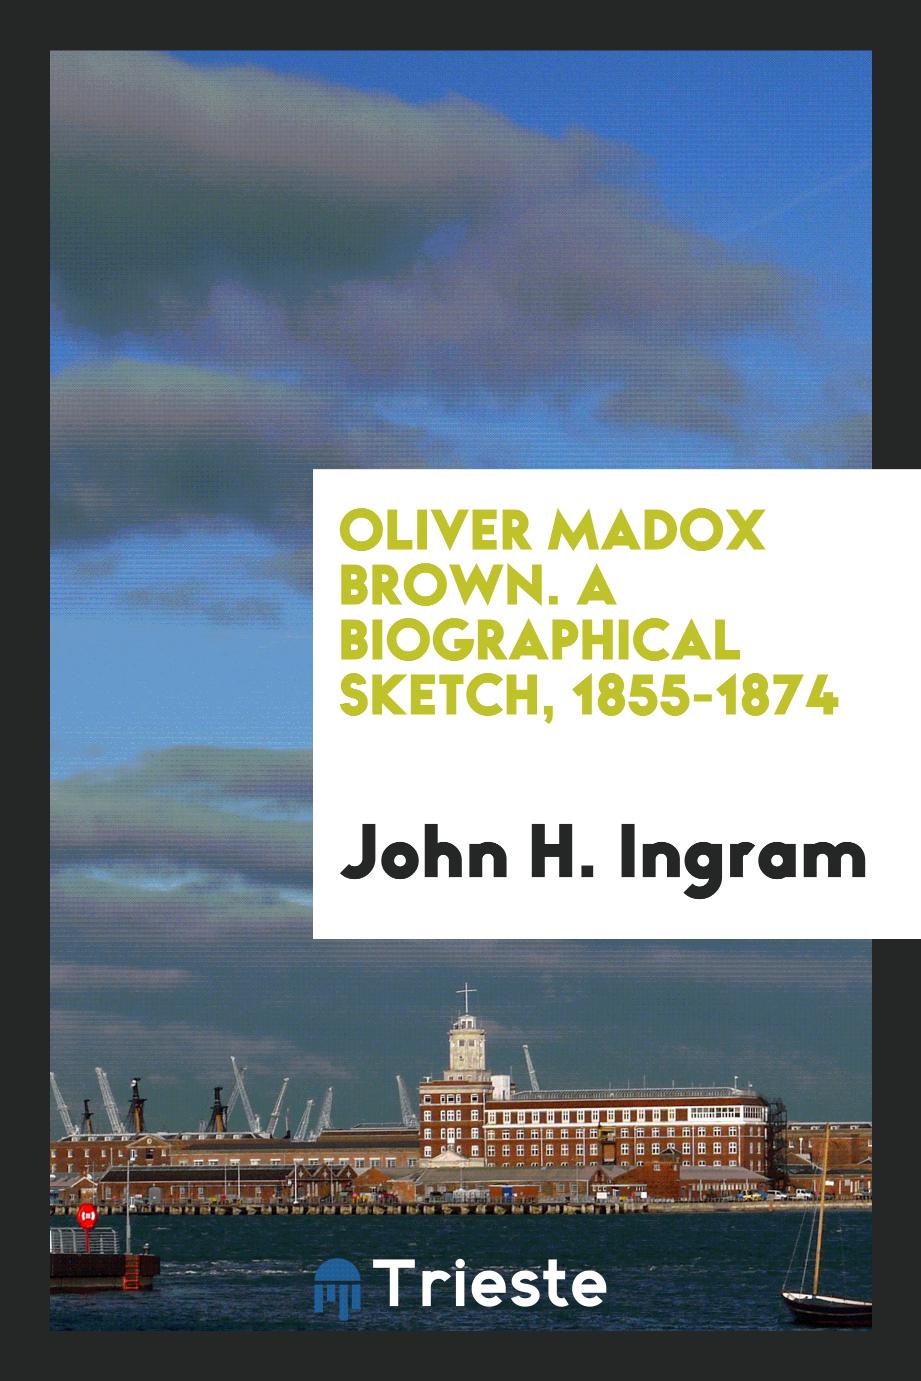 Oliver Madox Brown. A biographical sketch, 1855-1874